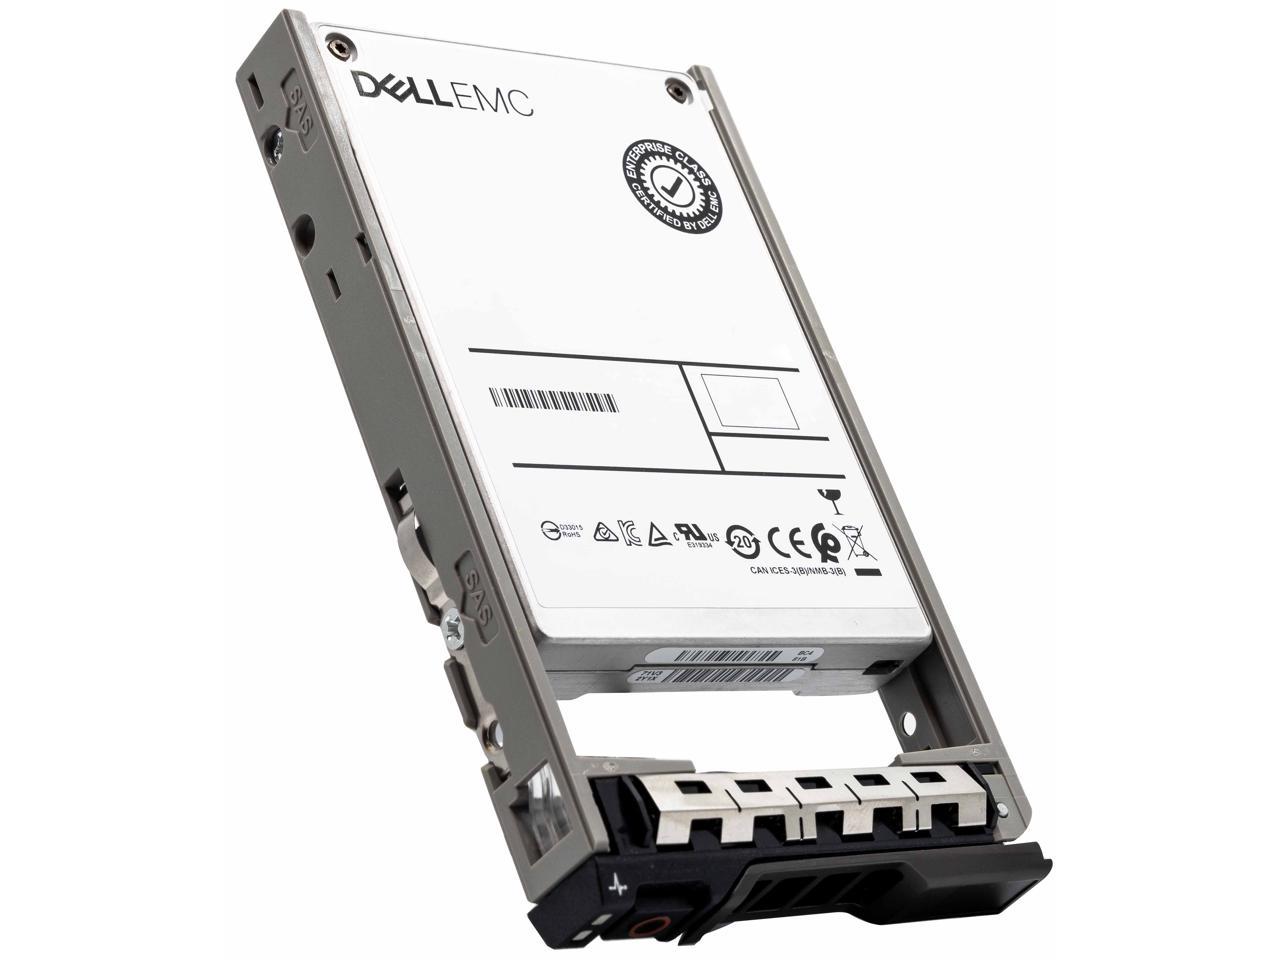 Dell G13 CW988 800GB SAS 12Gb/s 2.5" Manufacturer Recertified SSD